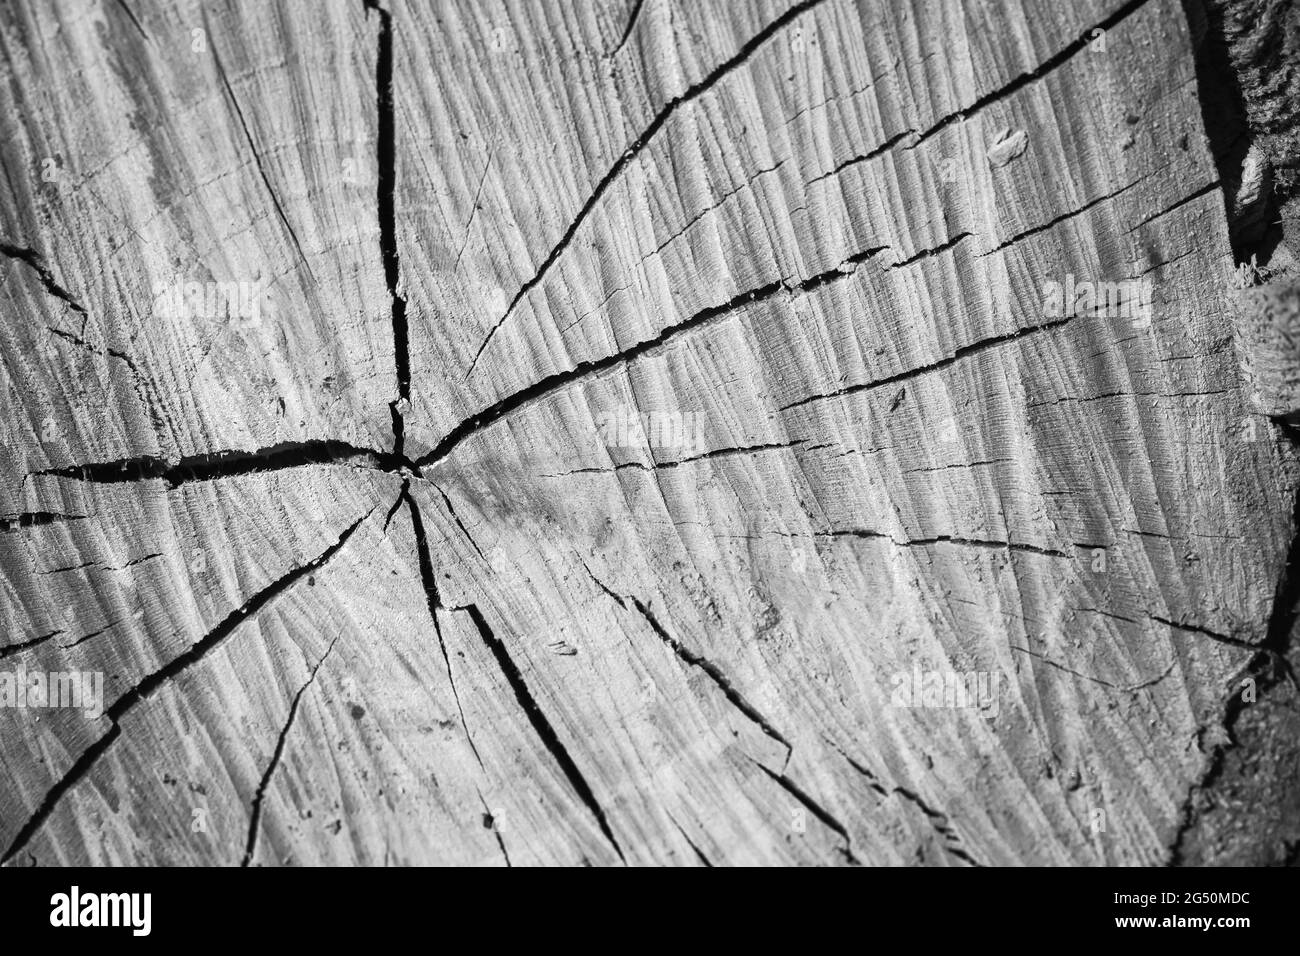 Circular pattern with cracks of an old wooden log section, black and white photo Stock Photo